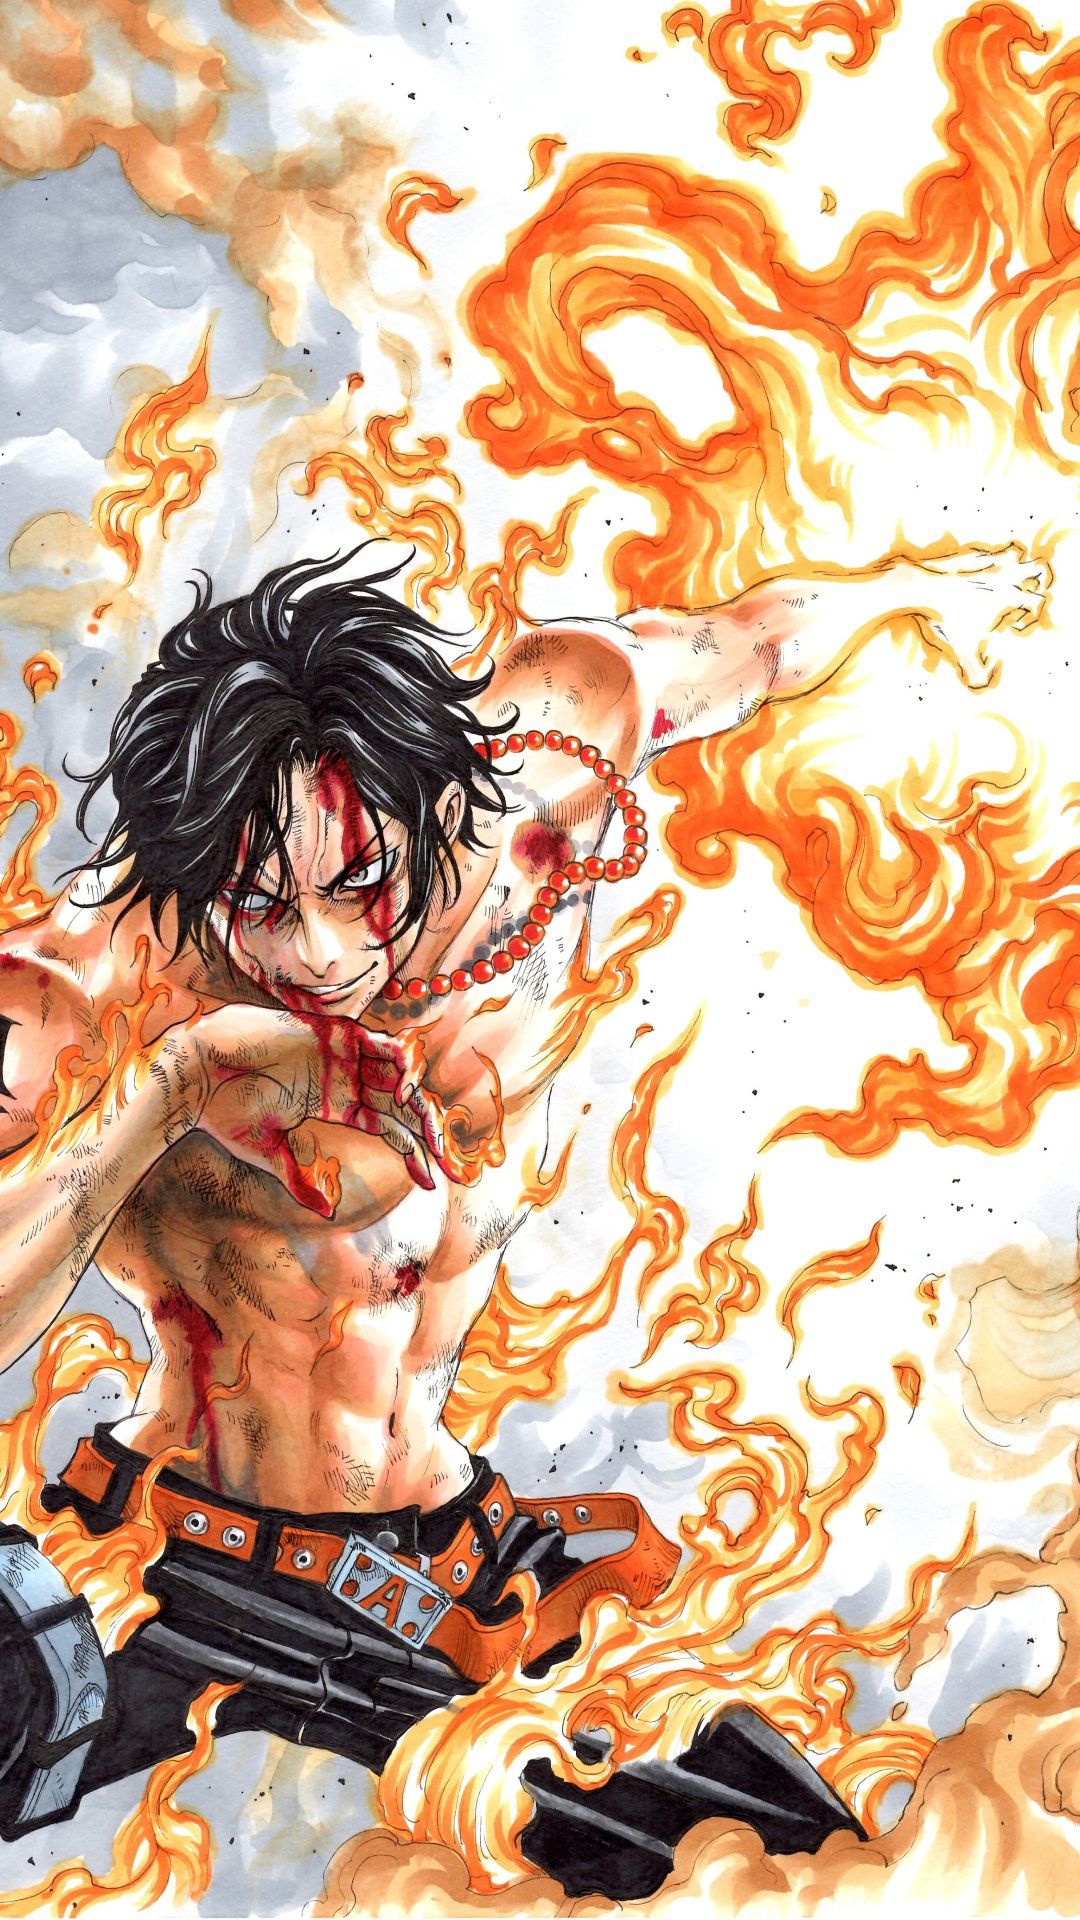 Portgas D Ace One Piece Iphone Wallpapers